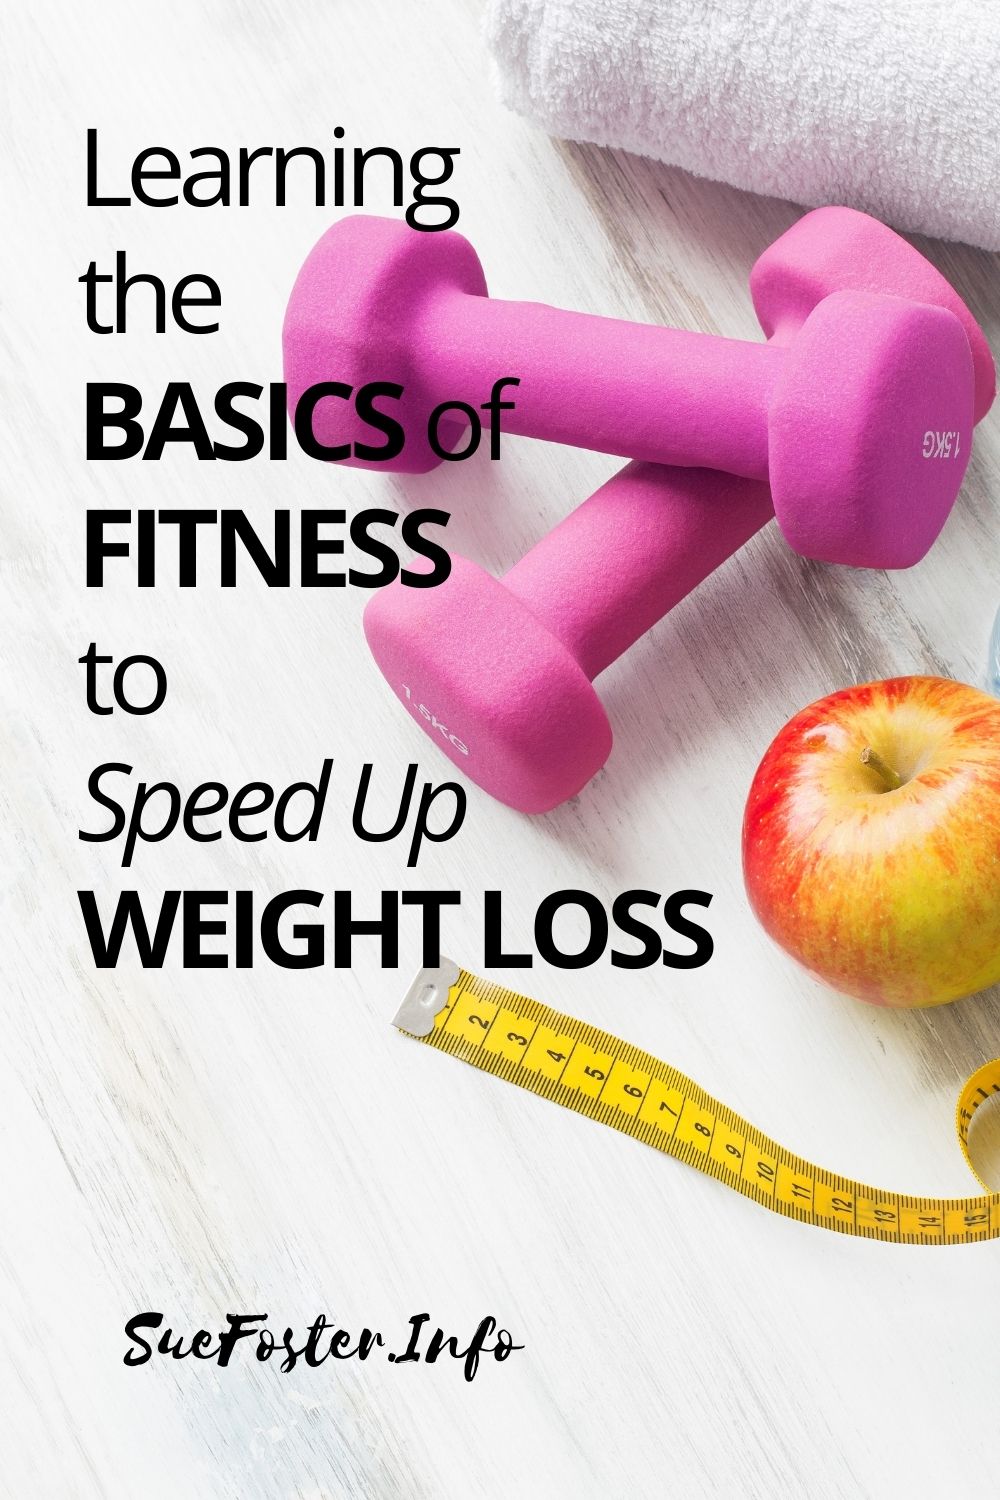 Congratulations on beginning your weight loss journey! Your efforts will be worth it. Here are some tips to get you through the difficult stage effortlessly so that you can reach your fitness goals fast.